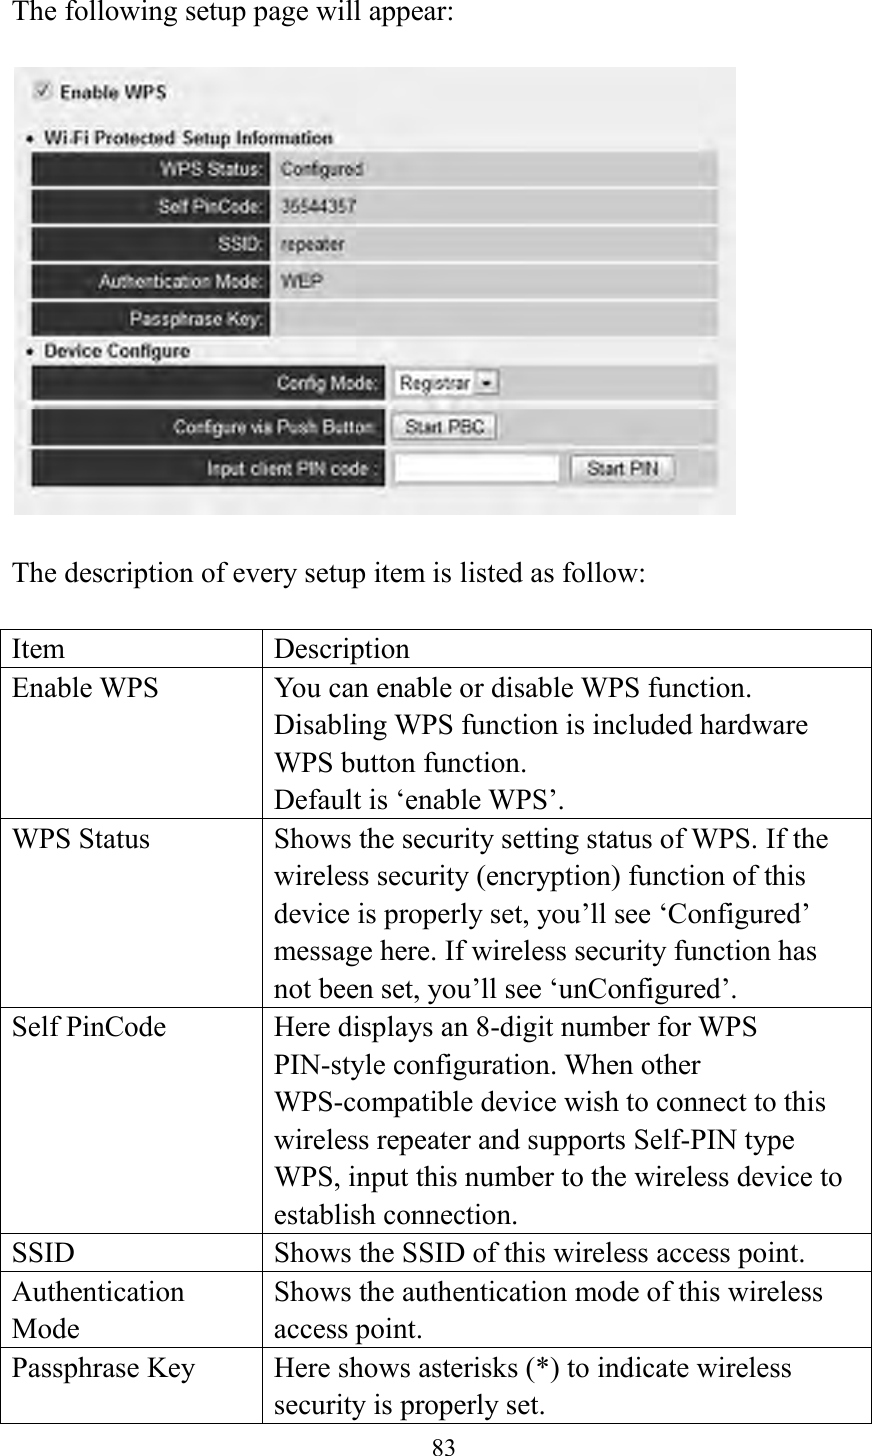  83  The following setup page will appear:    The description of every setup item is listed as follow:  Item Description Enable WPS You can enable or disable WPS function. Disabling WPS function is included hardware WPS button function.   Default is ‘enable WPS’.   WPS Status Shows the security setting status of WPS. If the wireless security (encryption) function of this device is properly set, you’ll see ‘Configured’ message here. If wireless security function has not been set, you’ll see ‘unConfigured’. Self PinCode Here displays an 8-digit number for WPS PIN-style configuration. When other WPS-compatible device wish to connect to this wireless repeater and supports Self-PIN type WPS, input this number to the wireless device to establish connection. SSID Shows the SSID of this wireless access point. Authentication Mode Shows the authentication mode of this wireless access point. Passphrase Key Here shows asterisks (*) to indicate wireless security is properly set. 